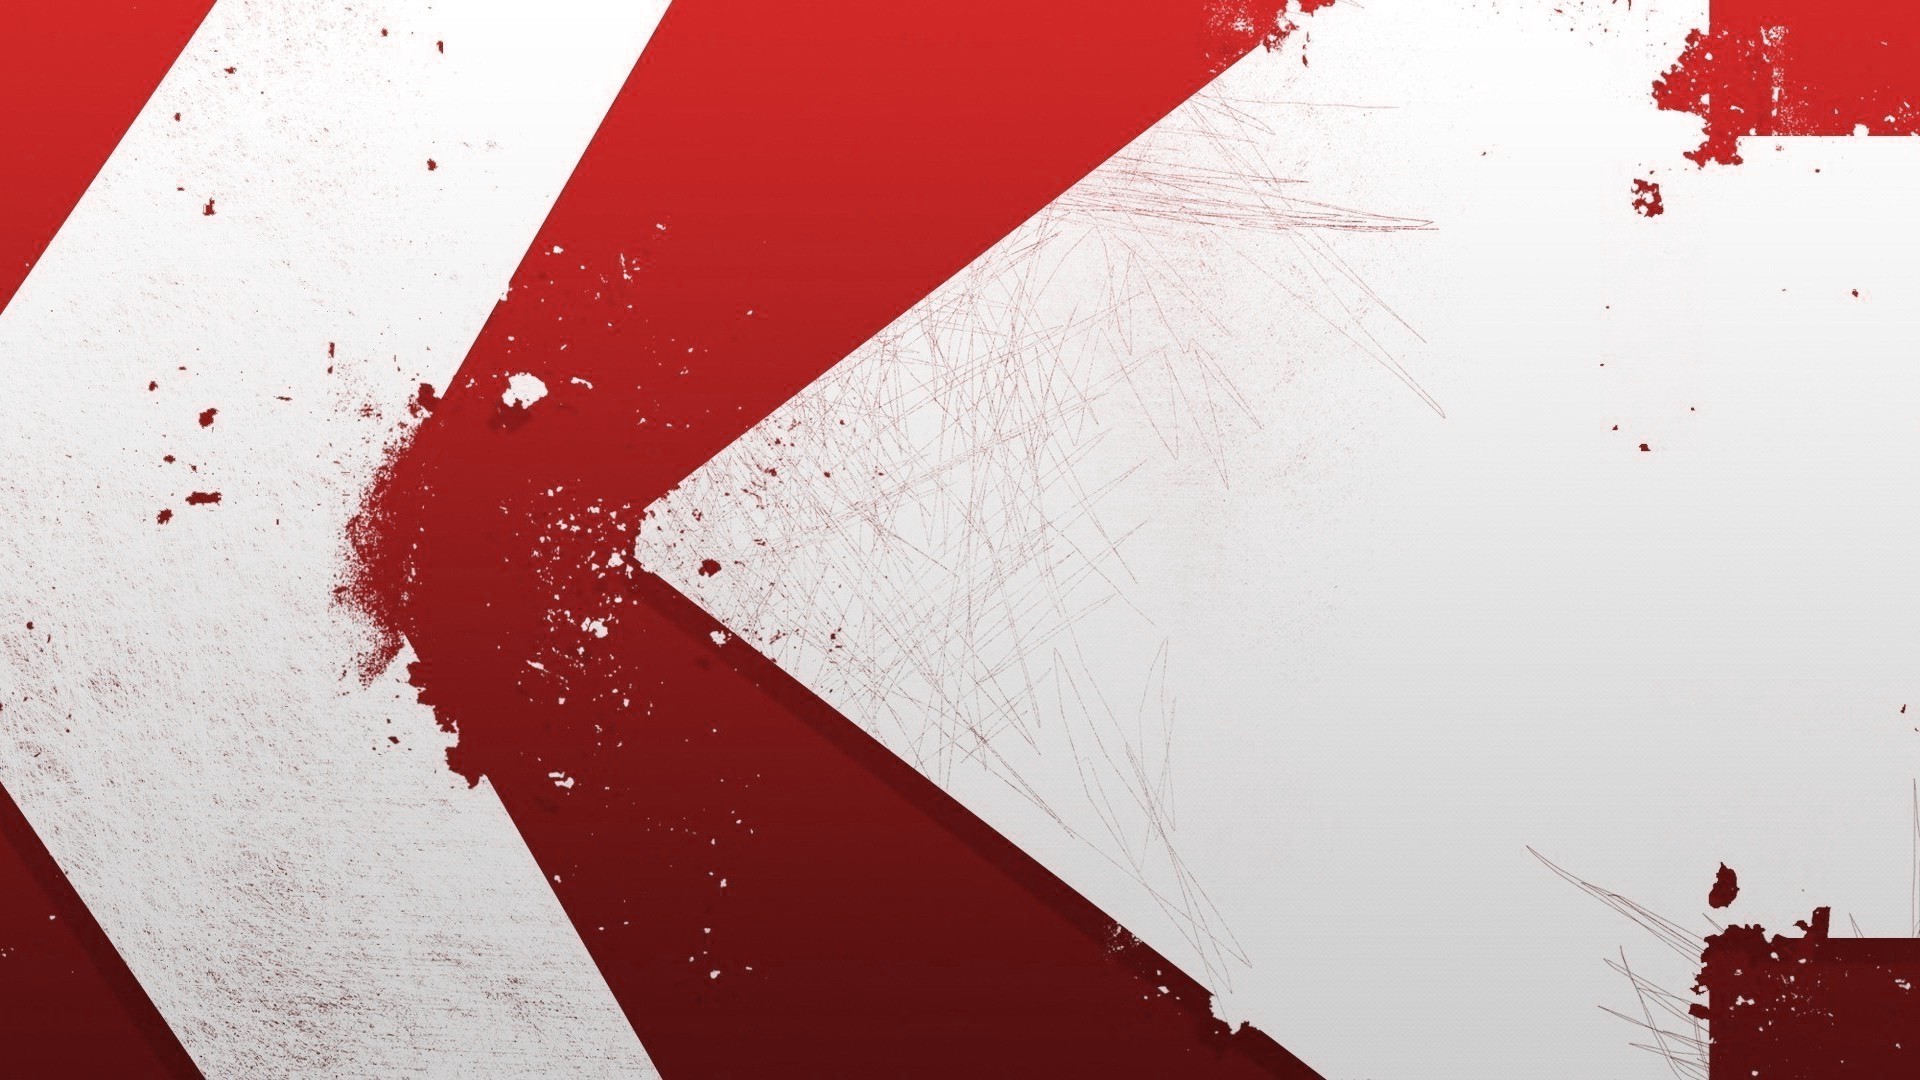 red and white arrows abstract hd wallpaper 1920x1080 5953jpg